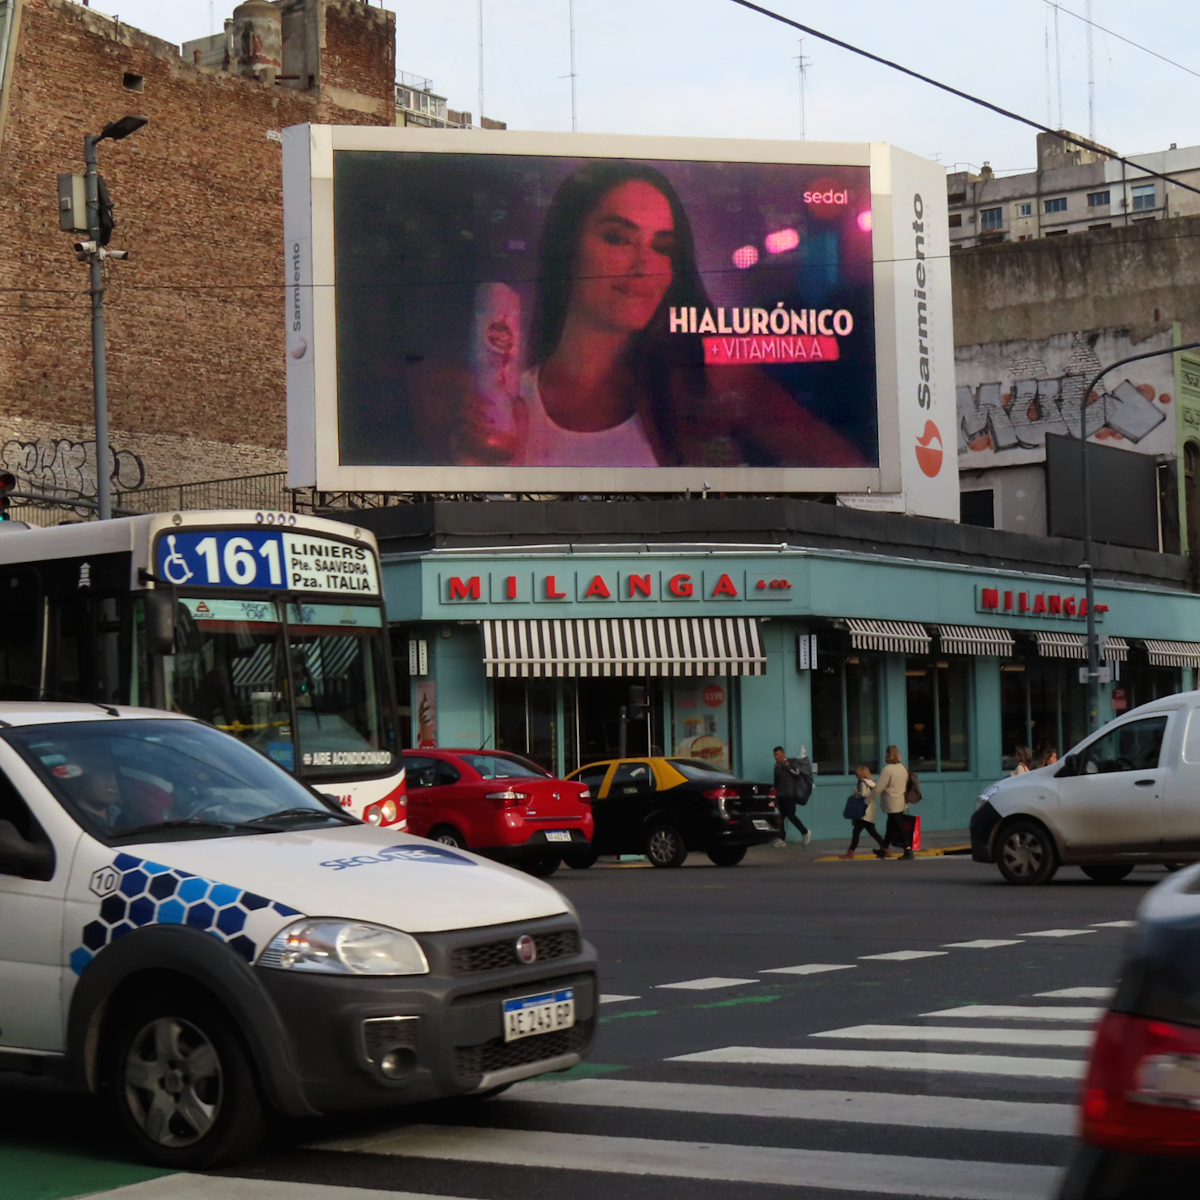 Discover how Sedal and Taggify revolutionized DOOH with their latest campaign